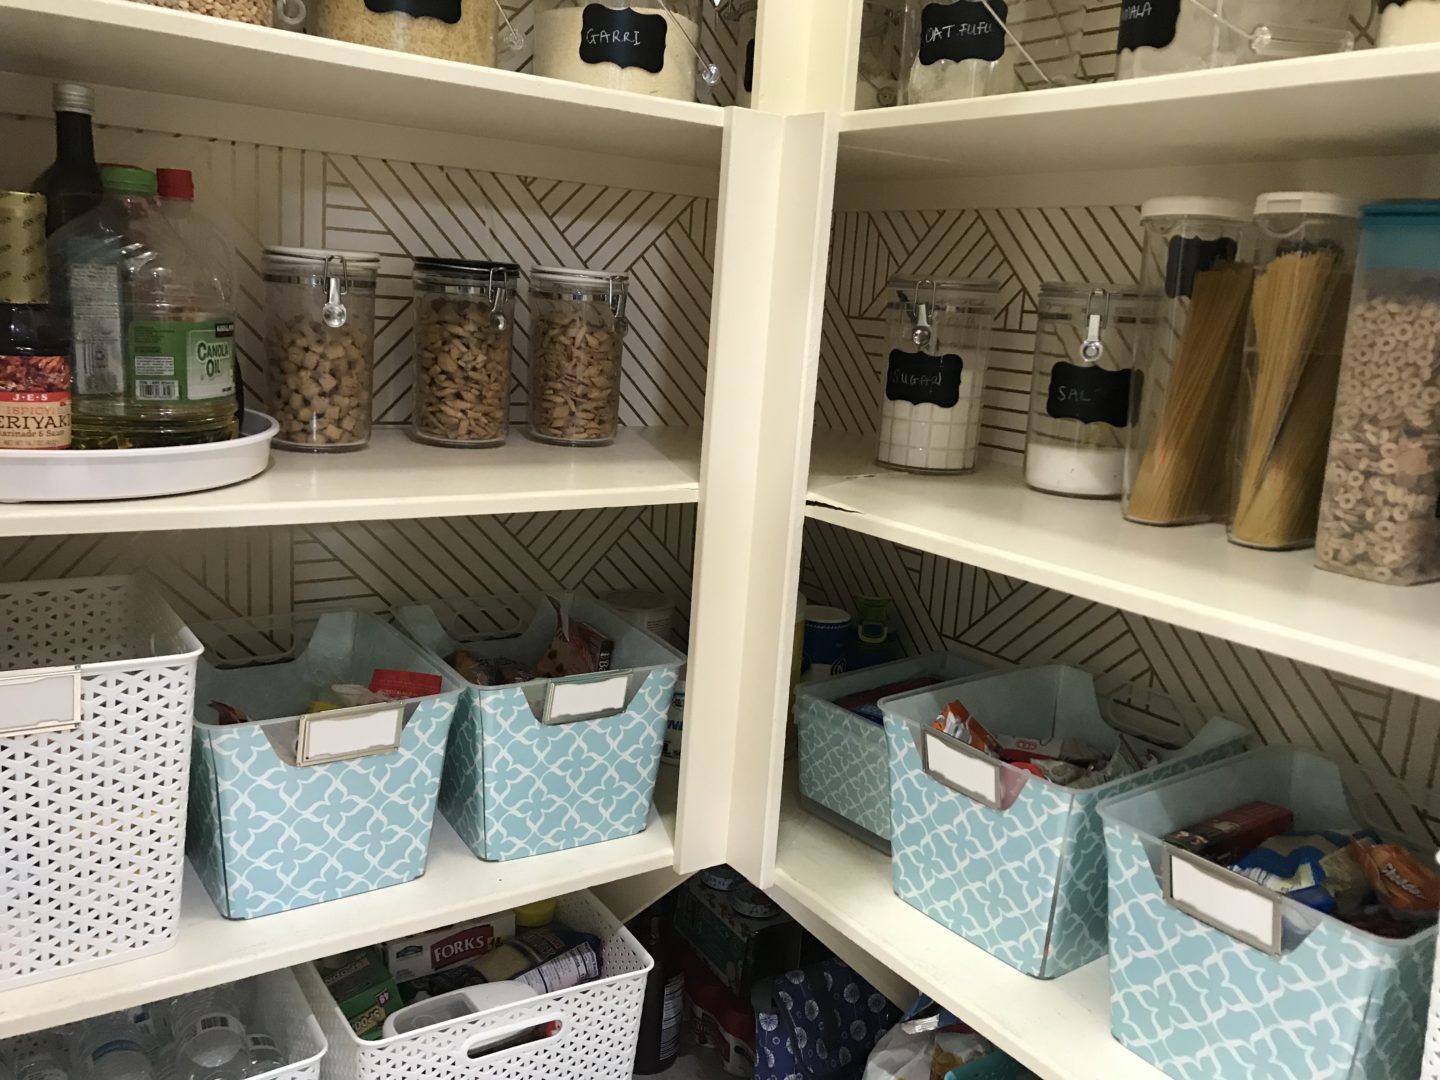 How to Organize a Kitchen Pantry